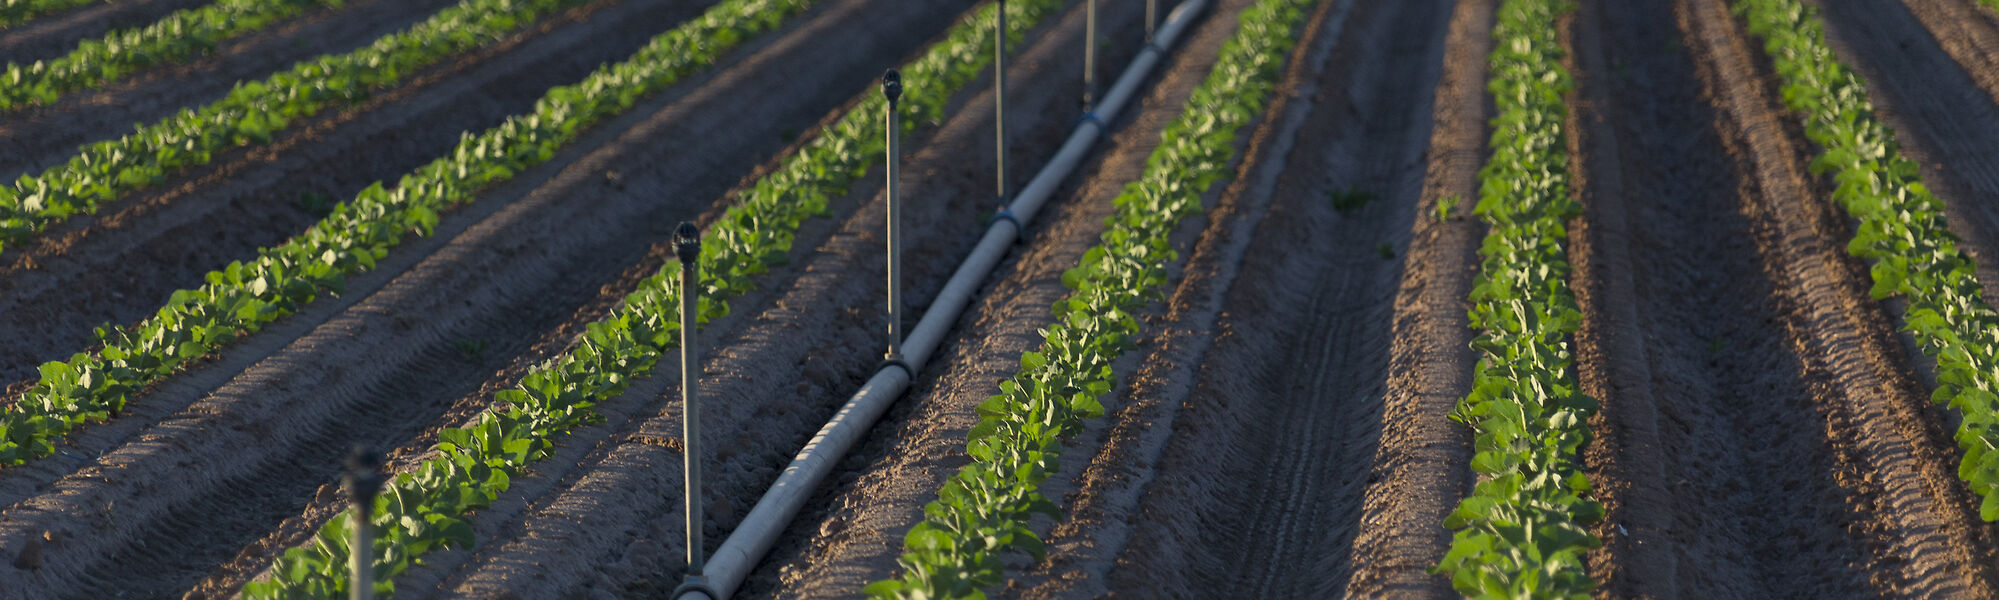 Irrigating vegetable row crops in Imperial Valley California with the Nelson Windfighter sprinklers